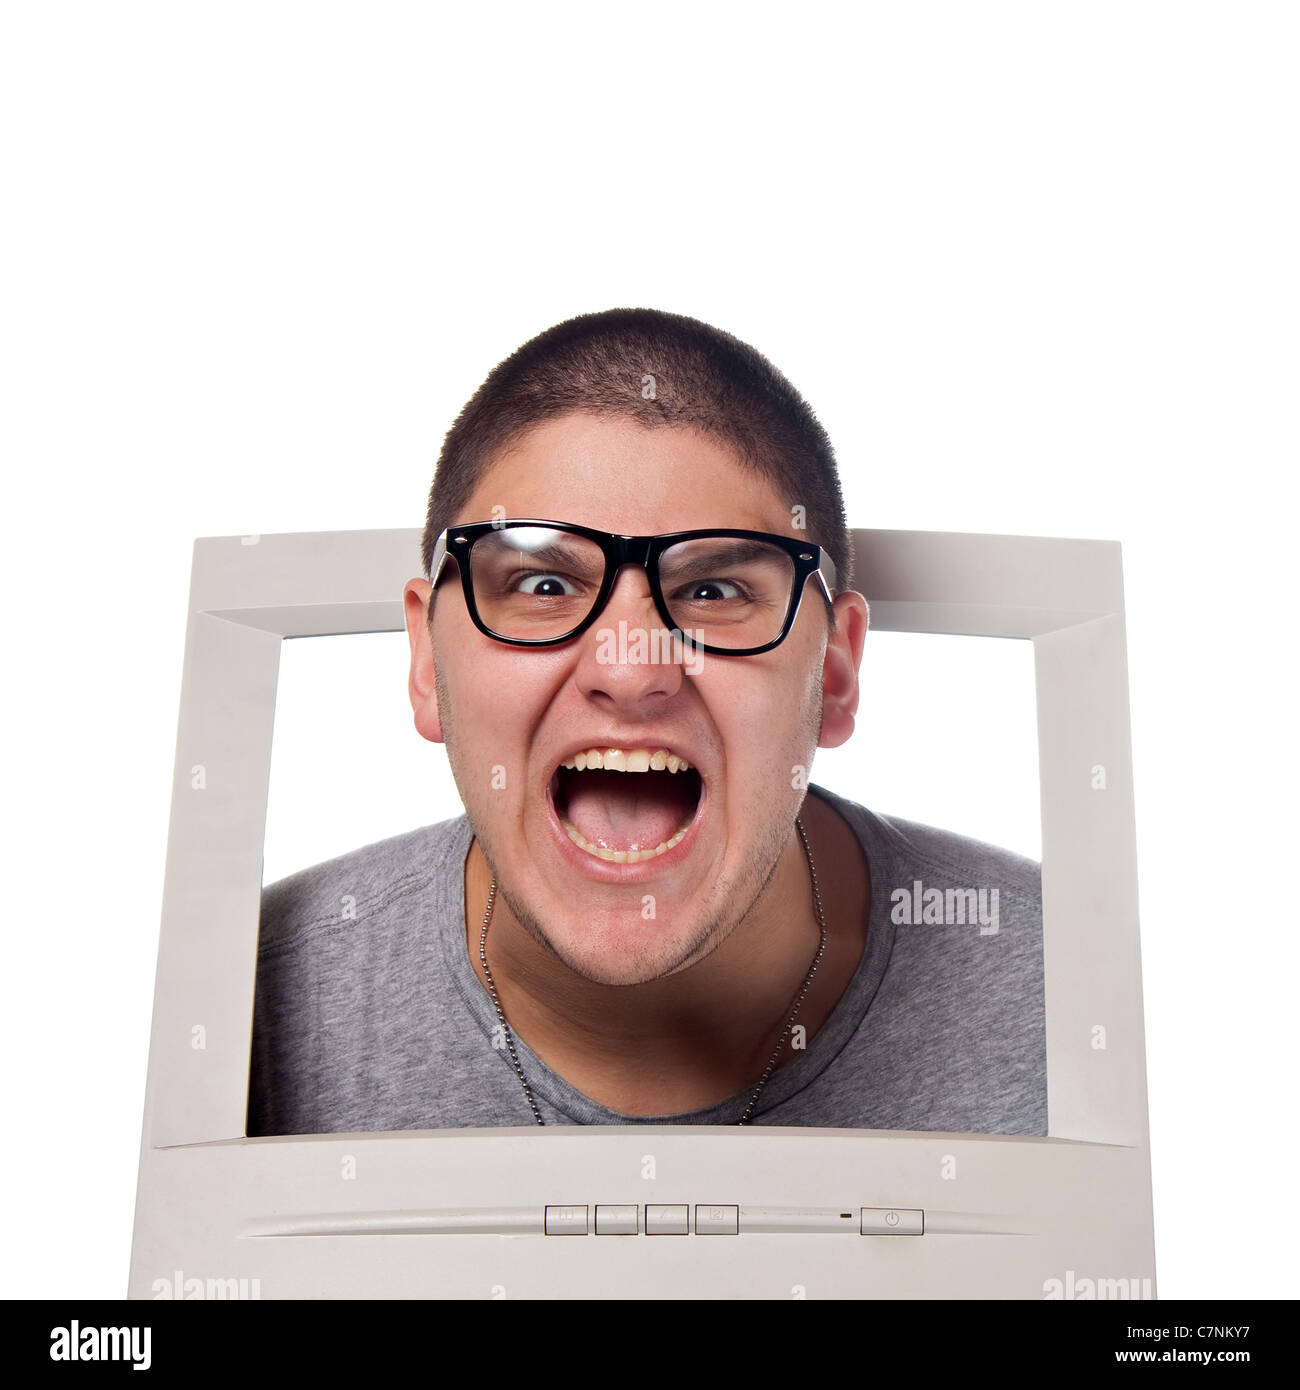 A young man popping his head out of a computer monitor with nerd glasses. Stock Photo